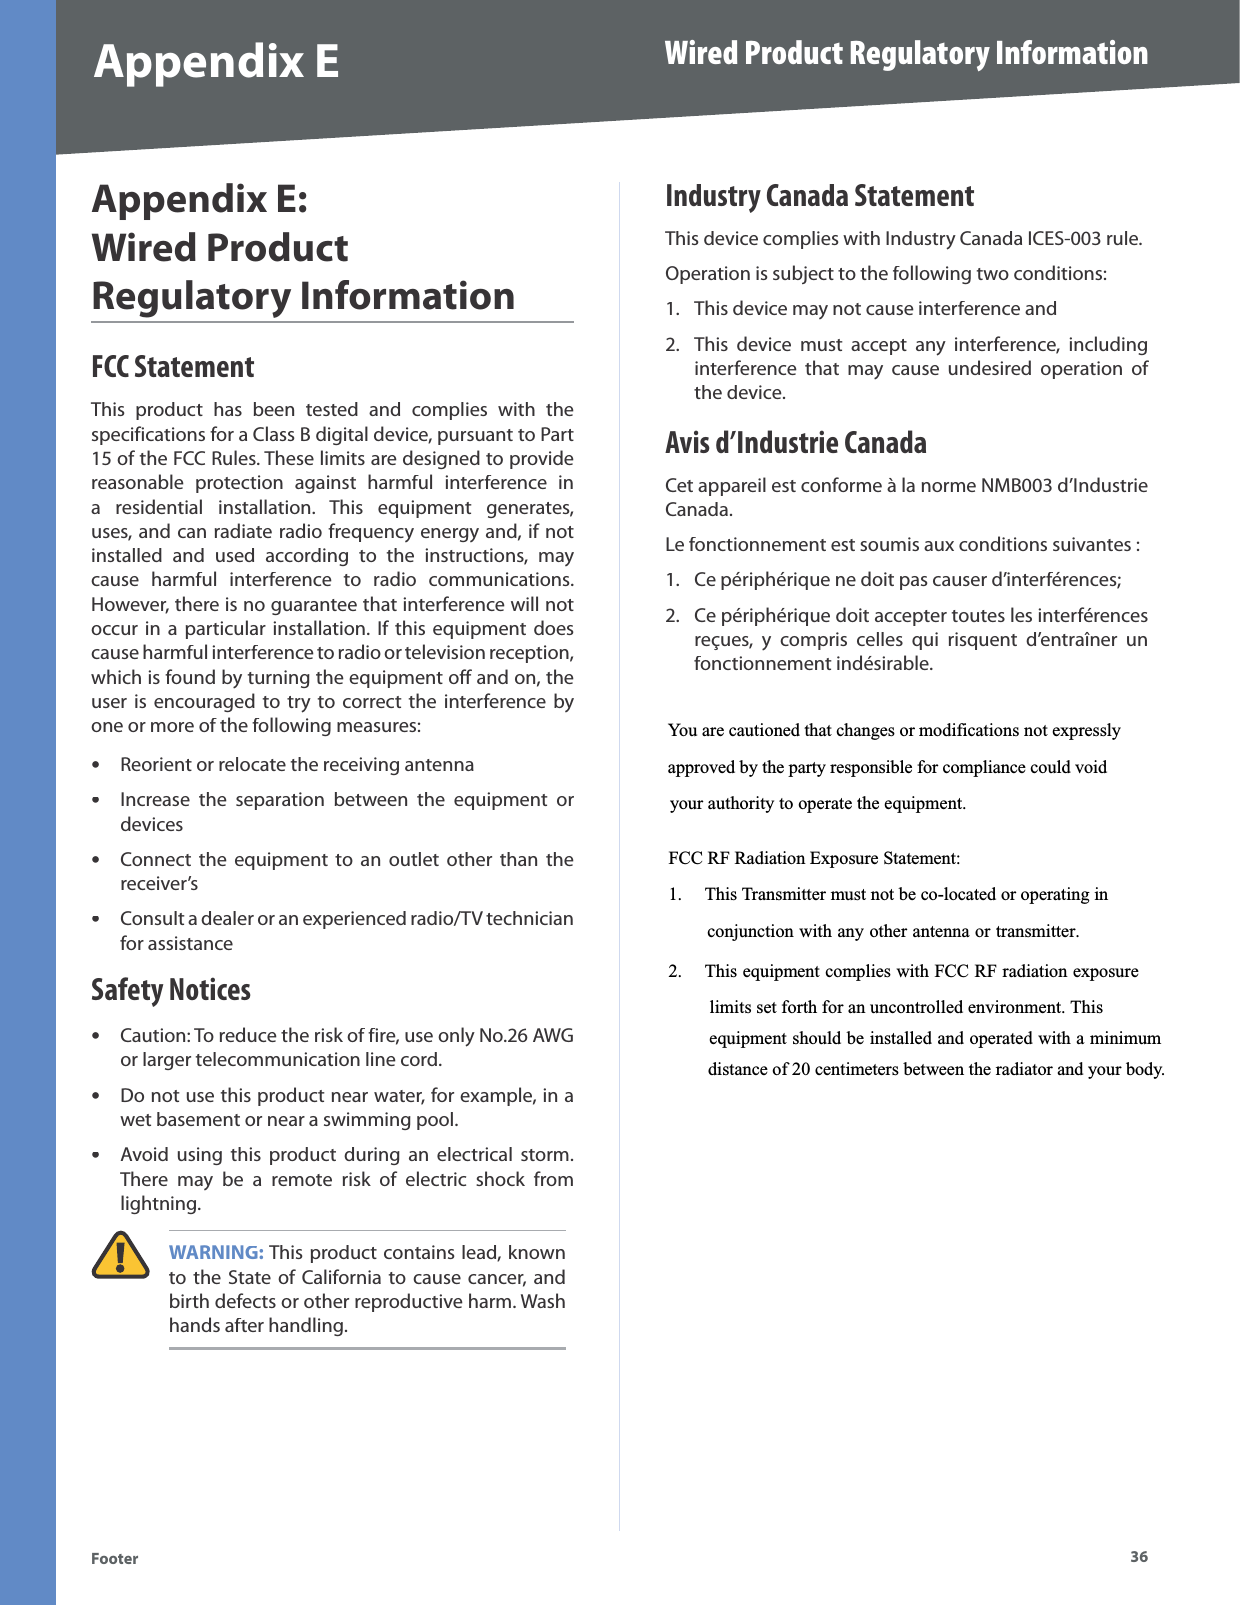 36Wired Product Regulatory InformationFooterAppendix EAppendix E:Wired ProductRegulatory InformationFCC StatementThis product has been tested and complies with the specifications for a Class B digital device, pursuant to Part 15 of the FCC Rules. These limits are designed to providereasonable protection against harmful interference ina residential installation. This equipment generates,uses, and can radiate radio frequency energy and, if not installed and used according to the instructions, may cause harmful interference to radio communications. However, there is no guarantee that interference will notoccur in a particular installation. If this equipment doescause harmful interference to radio or television reception, which is found by turning the equipment off and on, the user is encouraged to try to correct the interference byone or more of the following measures:Reorient or relocate the receiving antennaIncrease the separation between the equipment ordevicesConnect the equipment to an outlet other than the receiver’sConsult a dealer or an experienced radio/TV technician for assistanceSafety NoticesCaution: To reduce the risk of fire, use only No.26 AWGor larger telecommunication line cord.Do not use this product near water, for example, in a wet basement or near a swimming pool.Avoid using this product during an electrical storm.  There may be a remote risk of electric shock fromlightning.WARNING: This product contains lead, knownto the State of California to cause cancer, andbirth defects or other reproductive harm. Wash hands after handling.•••••••Industry Canada StatementThis device complies with Industry Canada ICES-003 rule.Operation is subject to the following two conditions:This device may not cause interference andThis device must accept any interference, including interference that may cause undesired operation of the device.Avis d’Industrie CanadaCet appareil est conforme à la norme NMB003 d’IndustrieCanada.Le fonctionnement est soumis aux conditions suivantes : Ce périphérique ne doit pas causer d’interférences; Ce périphérique doit accepter toutes les interférences reçues, y compris celles qui risquent d’entraîner un fonctionnement indésirable.1.2.1.2.You are cautioned that changes or modifications not expresslyapproved by the party responsible for compliance could voidyour authority to operate the equipment. FCC RF Radiation Exposure Statement: 1. This Transmitter must not be co-located or operating in       conjunction with any other antenna or transmitter. 2. This equipment complies with FCC RF radiation exposure limits set forth for an uncontrolled environment. This equipment should be installed and operated with a minimumdistance of 20 centimeters between the radiator and your body.